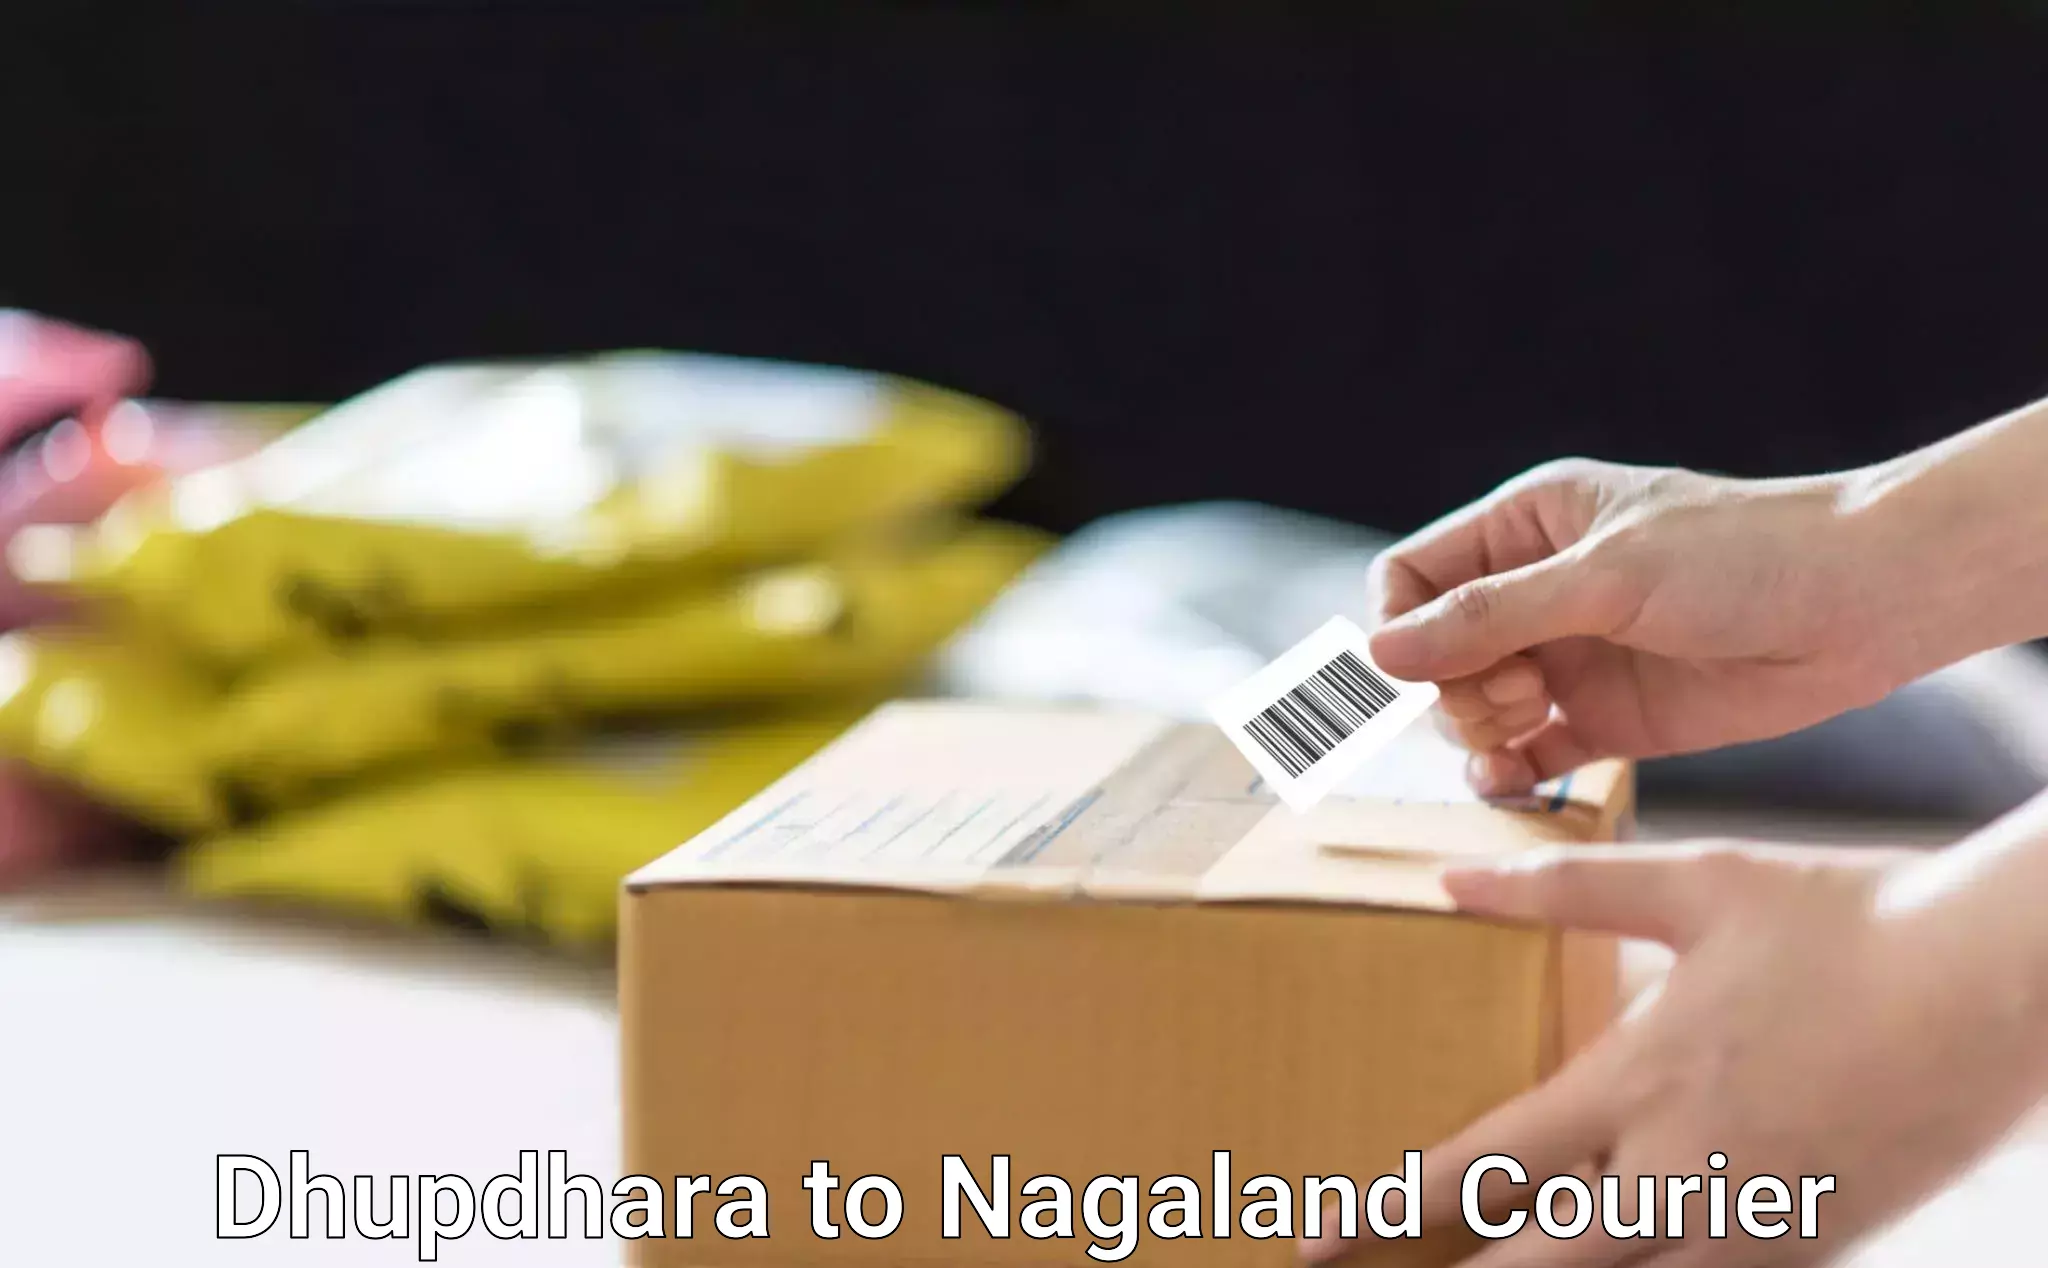 Business courier solutions Dhupdhara to Nagaland